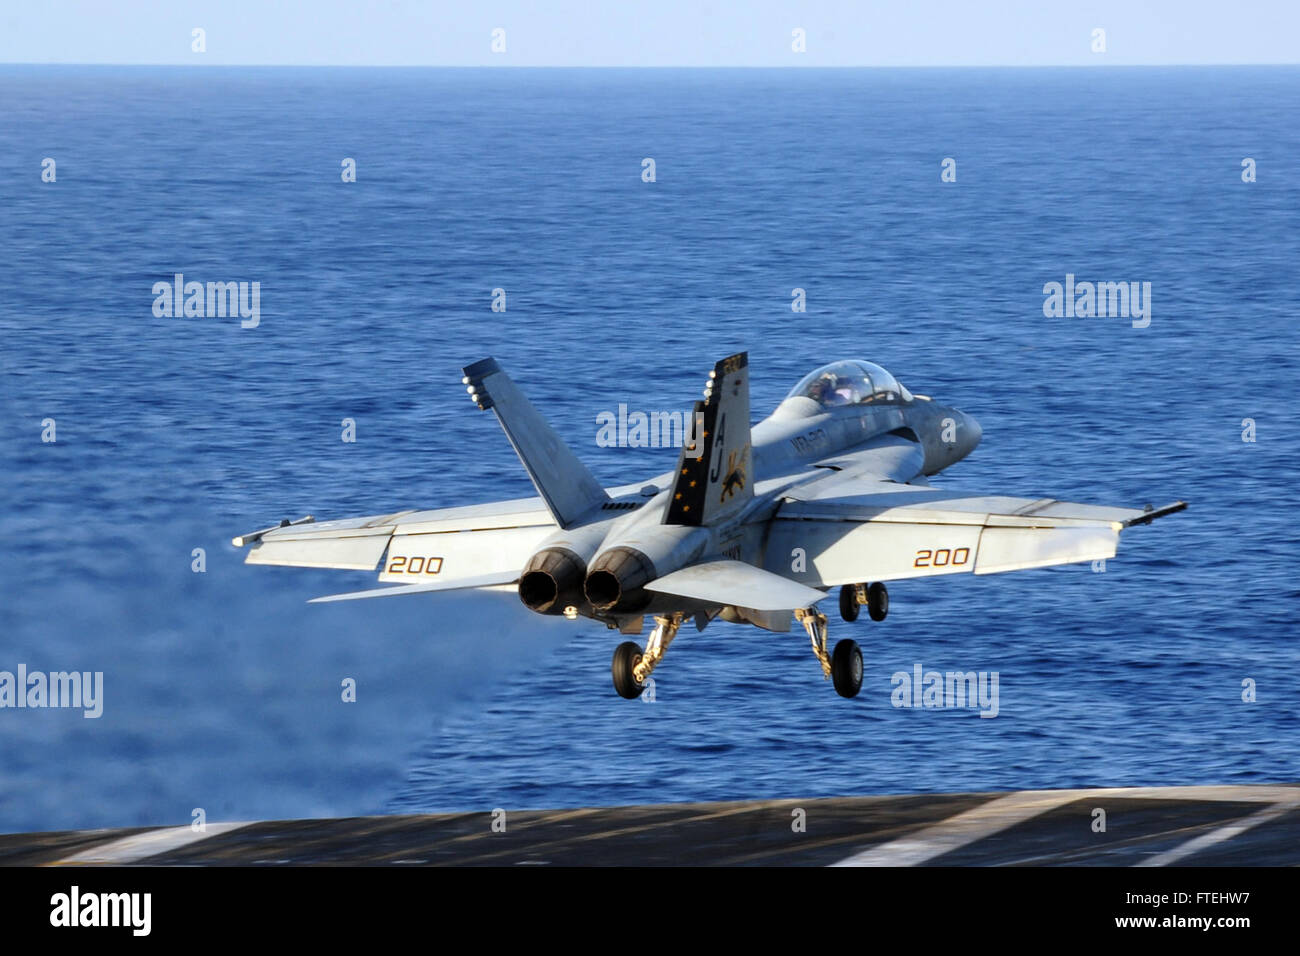 MEDITERRANEAN SEA (Oct. 29, 2014) An F/A-18F Super Hornet, attached to the “Fighting Black Lions” of Strike Fighter Squadron (VFA) 213, launches from the flight deck of the aircraft carrier USS George H.W. Bush (CVN 77). George H.W. Bush, homeported in Norfolk, Va., is conducting naval operations in the U.S. 6th Fleet area of operations in support of U.S. national security interests in Europe. Stock Photo